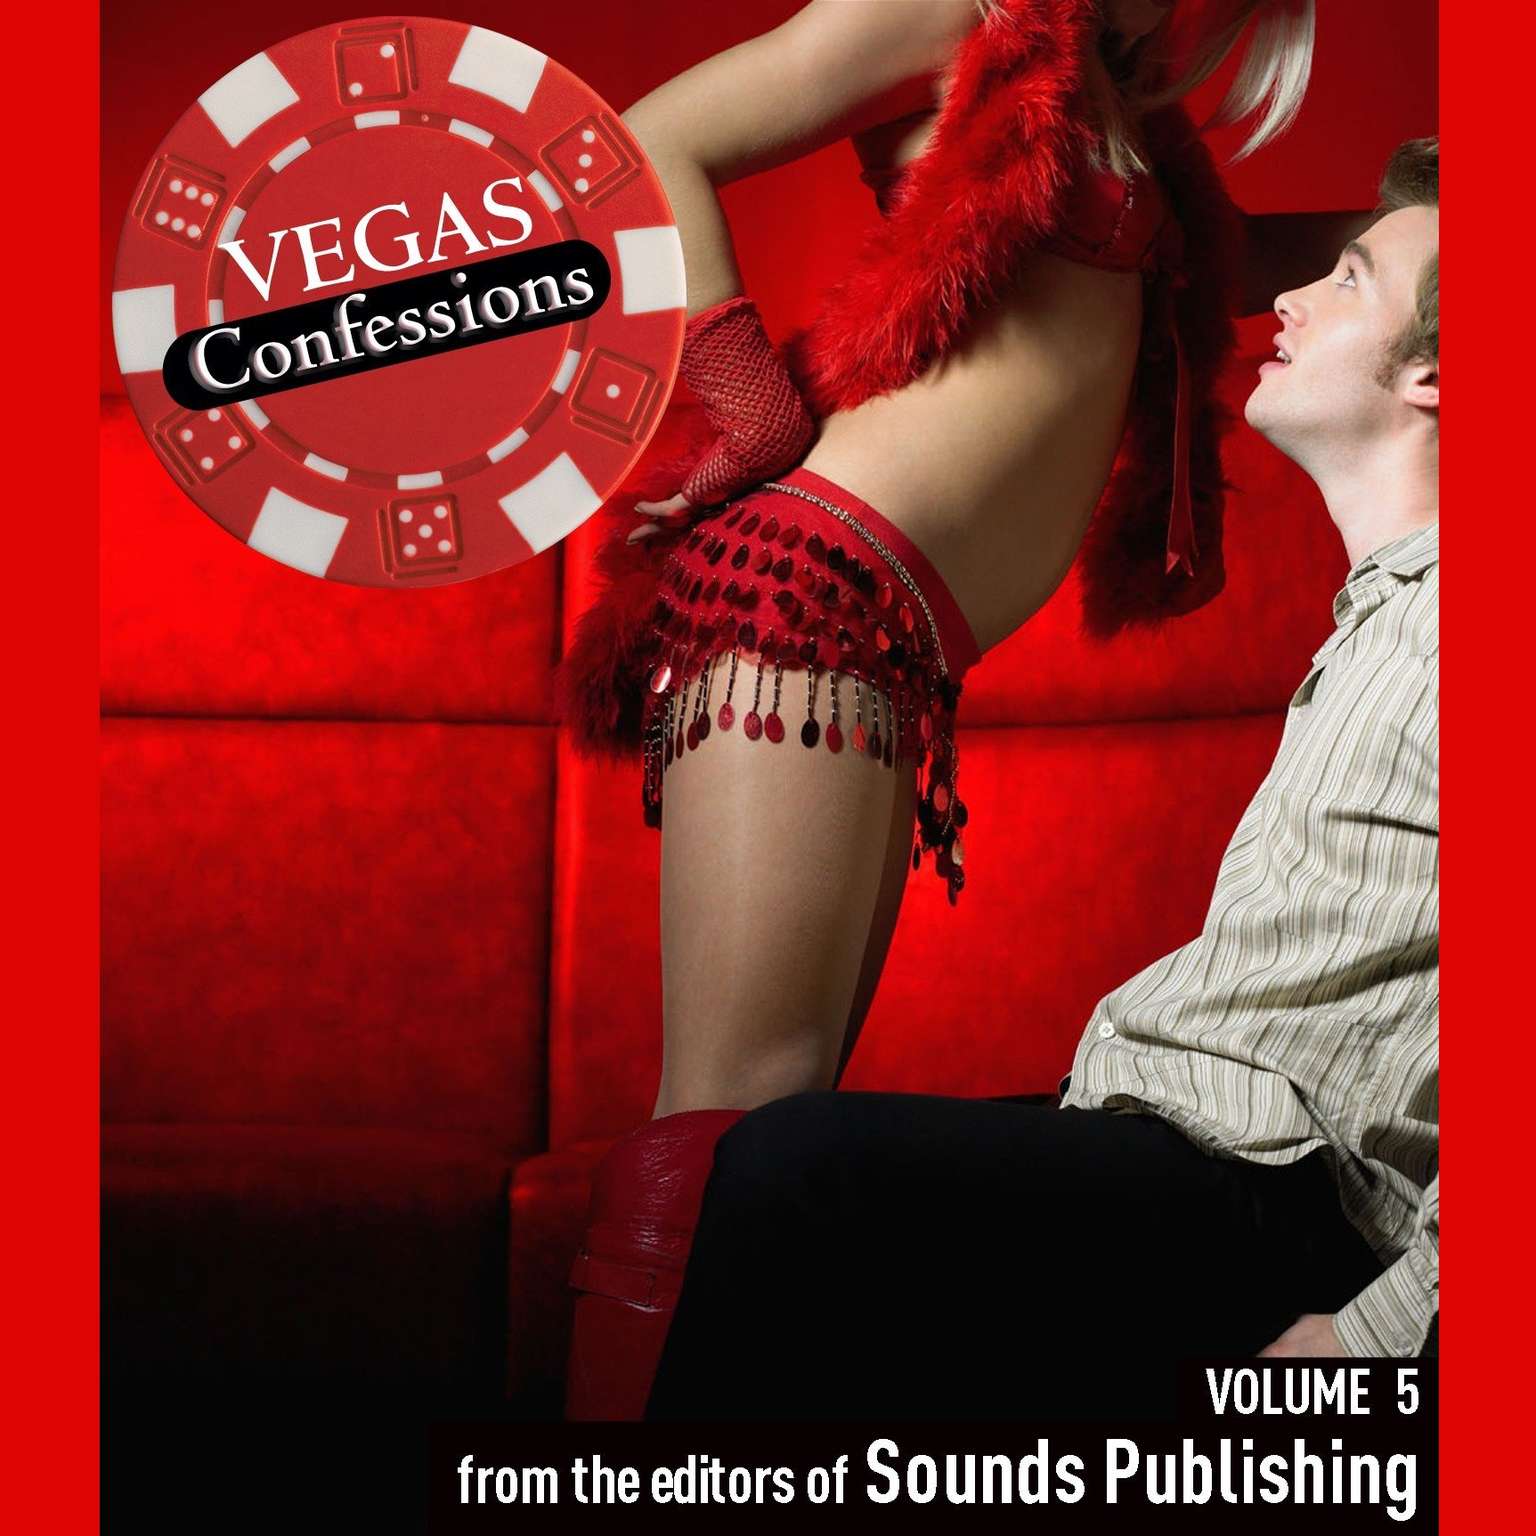 Vegas Confessions 5 Audiobook, by The Editors of Sounds Publishing